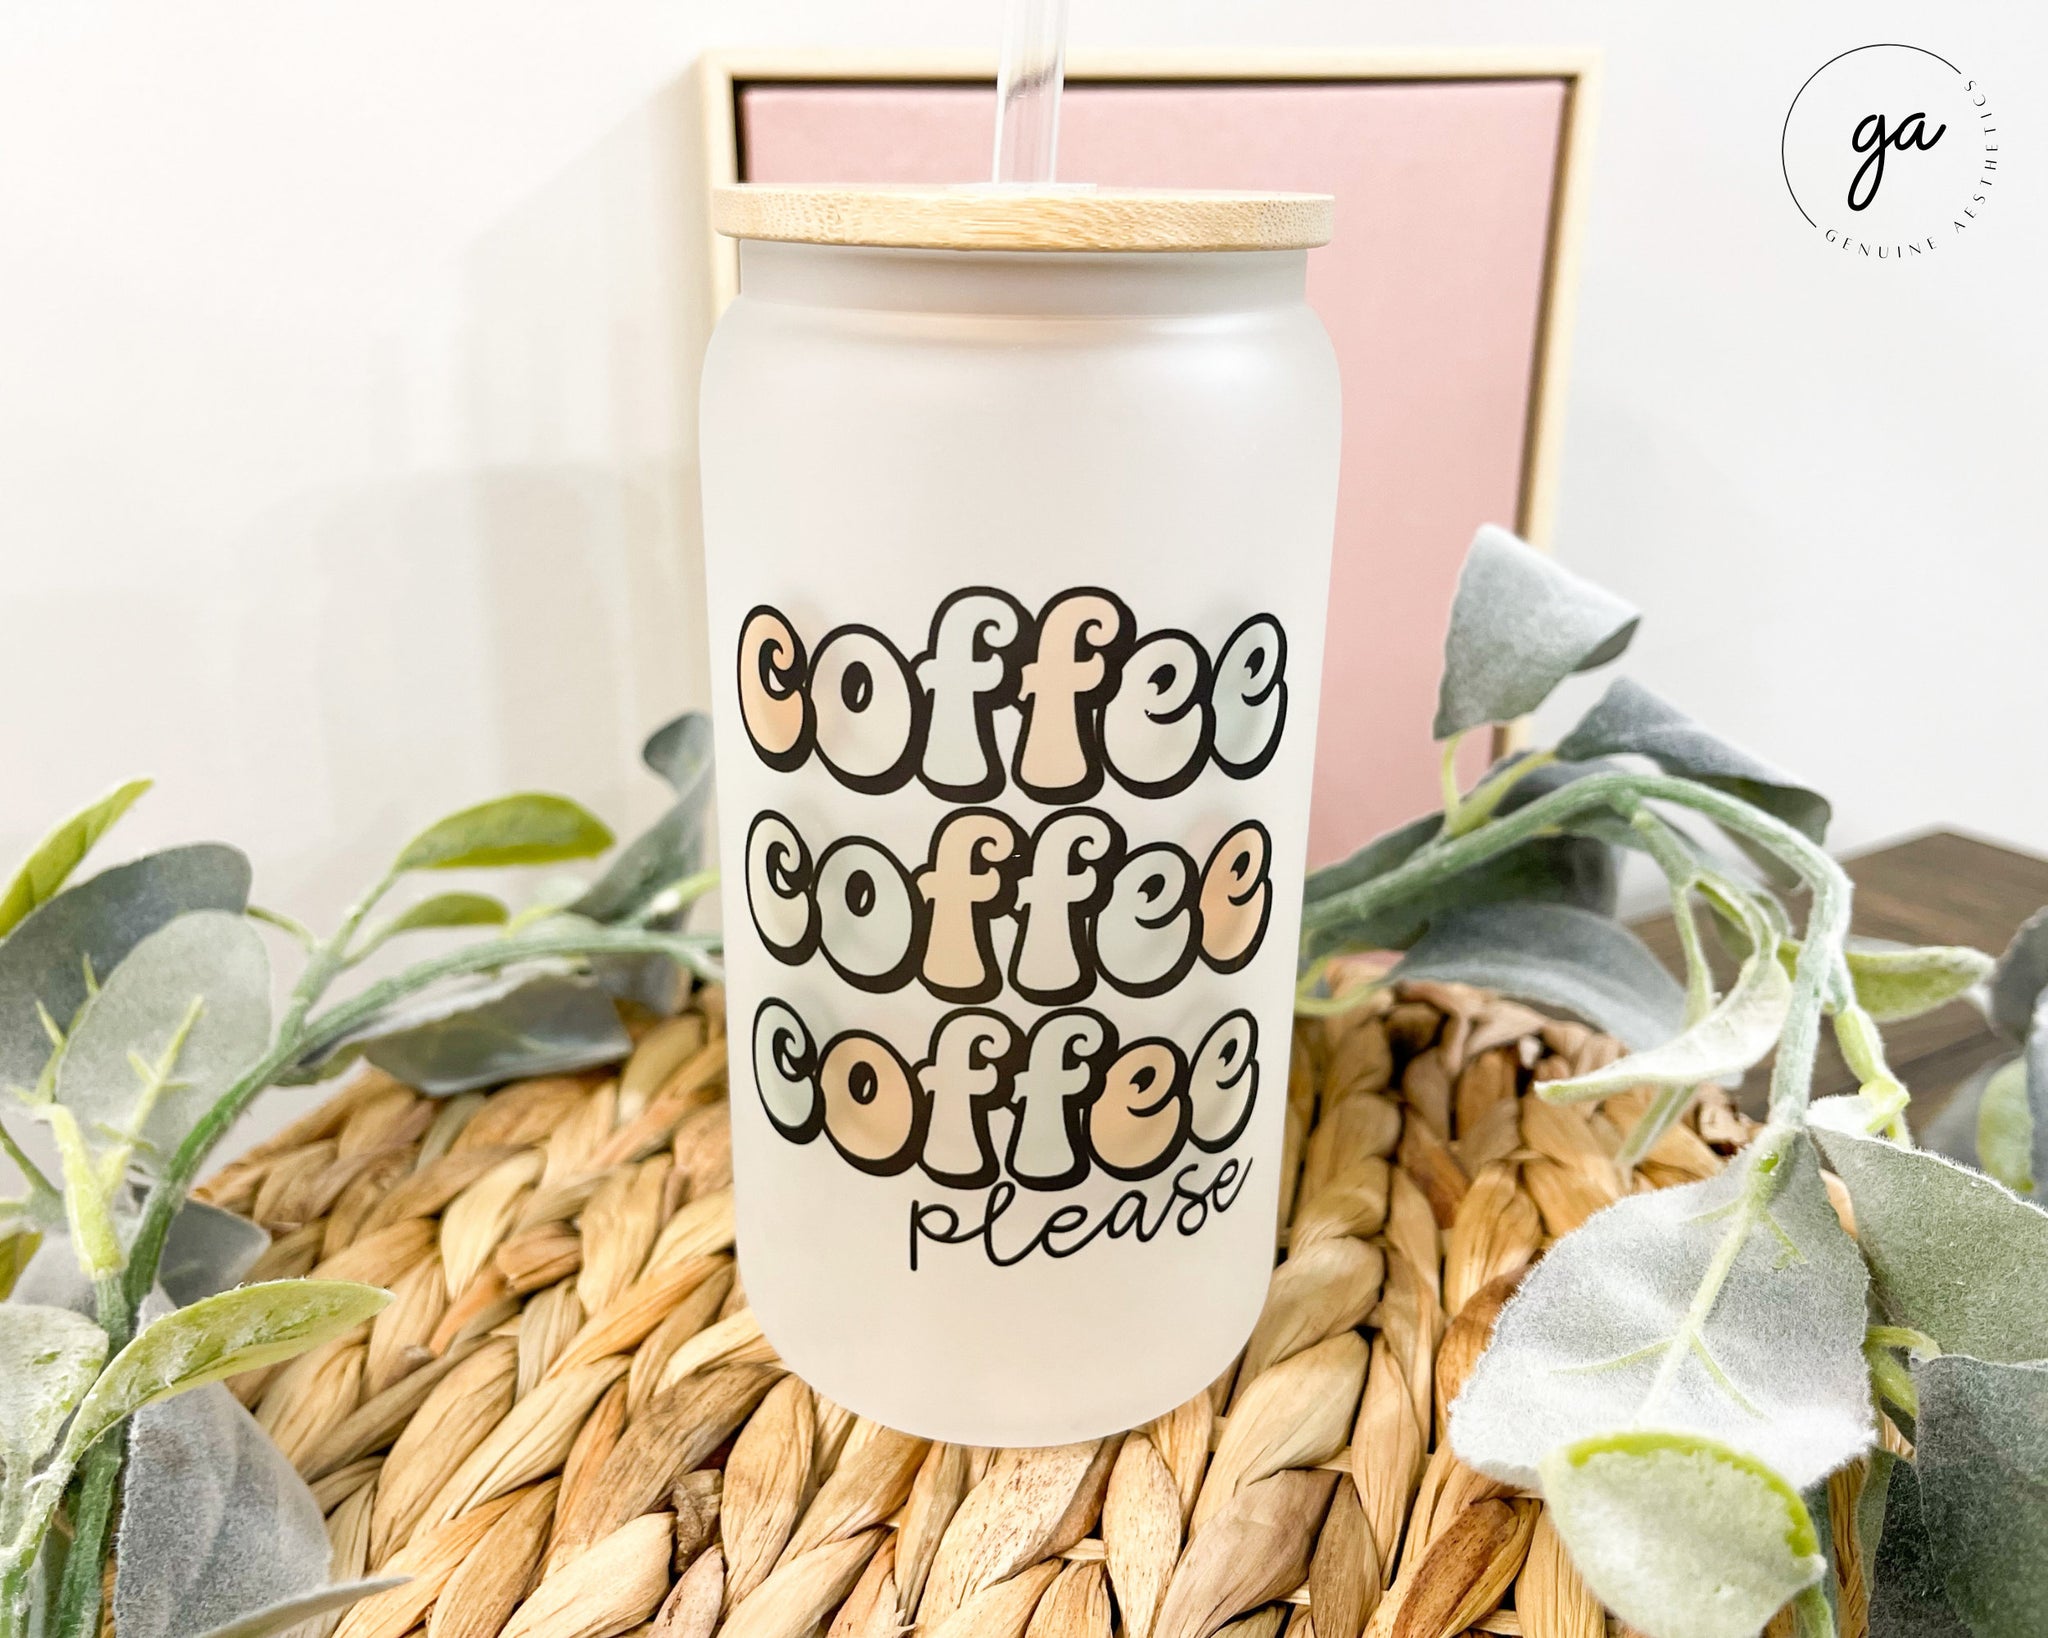 16oz Glass Coffee Can, Iced Coffee Glass, Glass Coffee Cup, Aesthetic Glass  Coffee Cup, Soda Can Glass, Mothers Day Gift